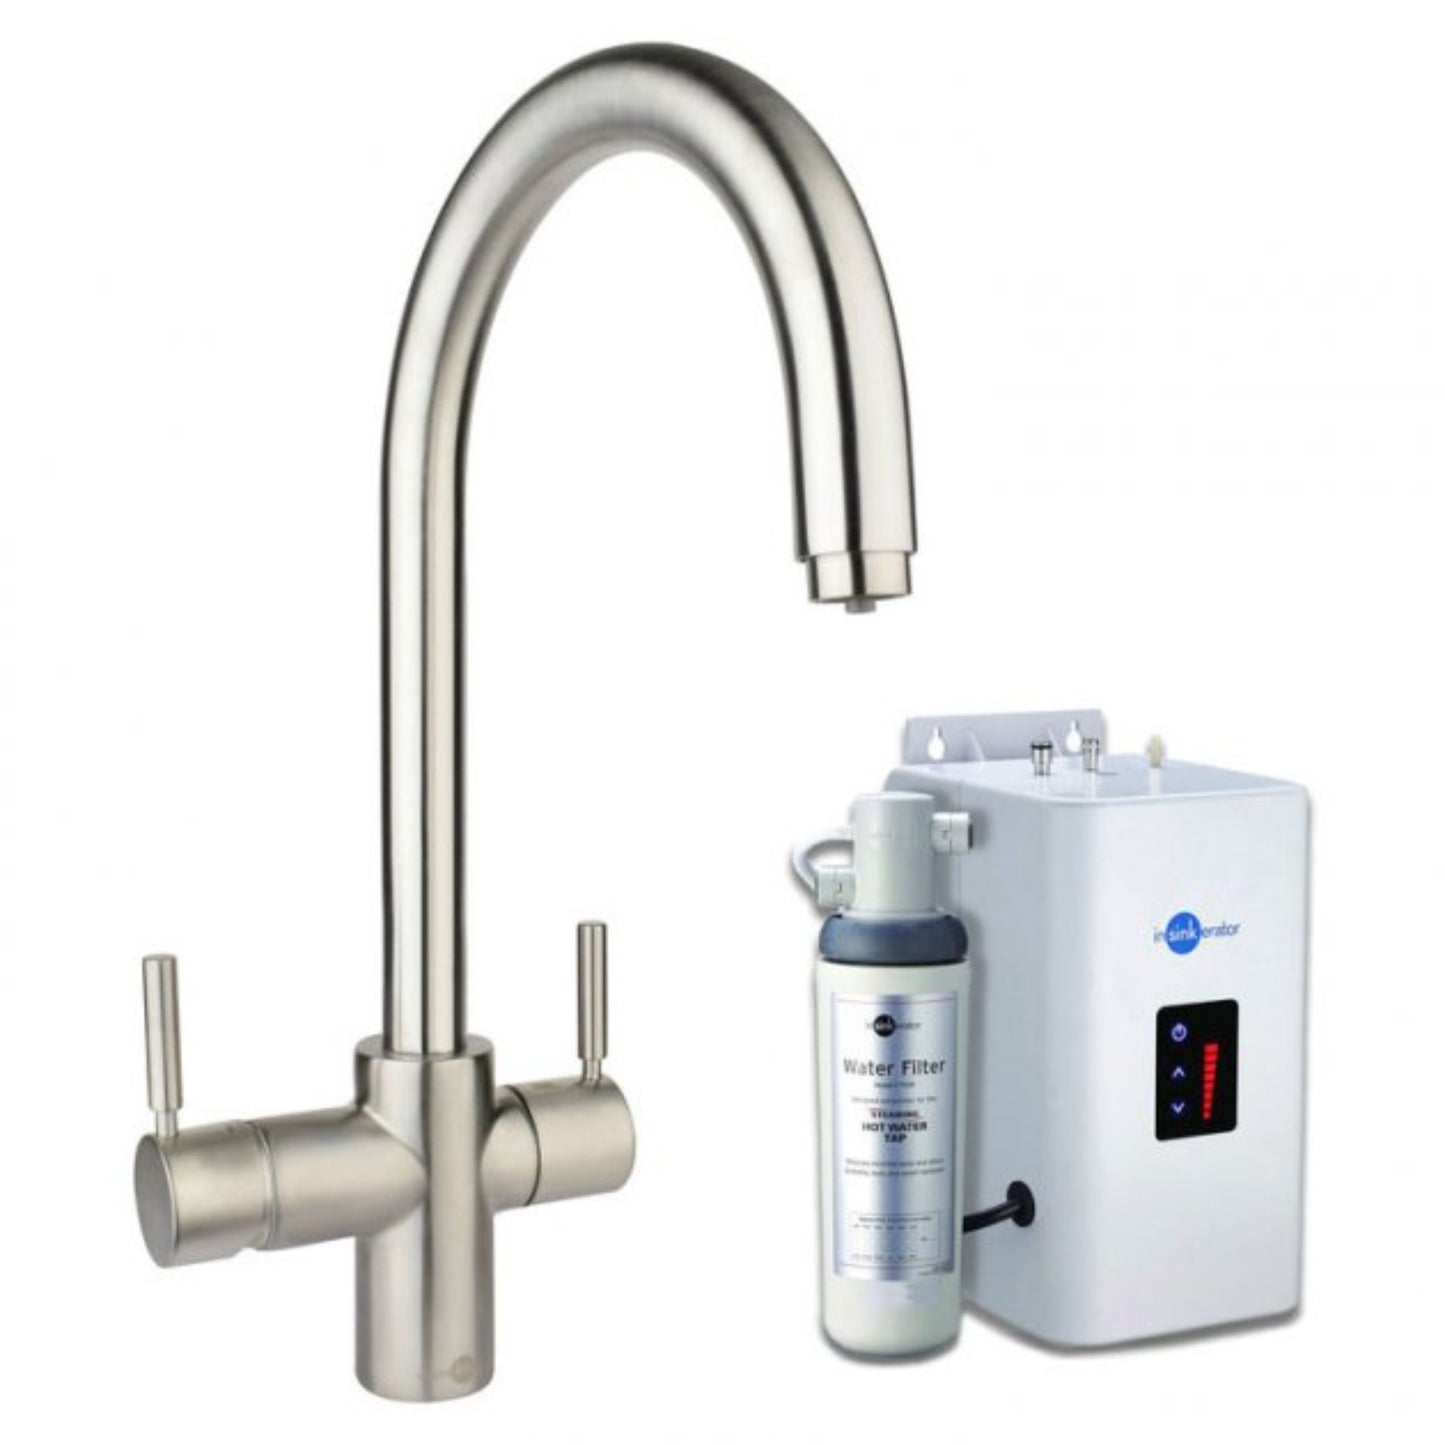 InSinkErator 3N1 J Spout Tap with Neo Boiler Tank & Filter pack (Brushed Steel)